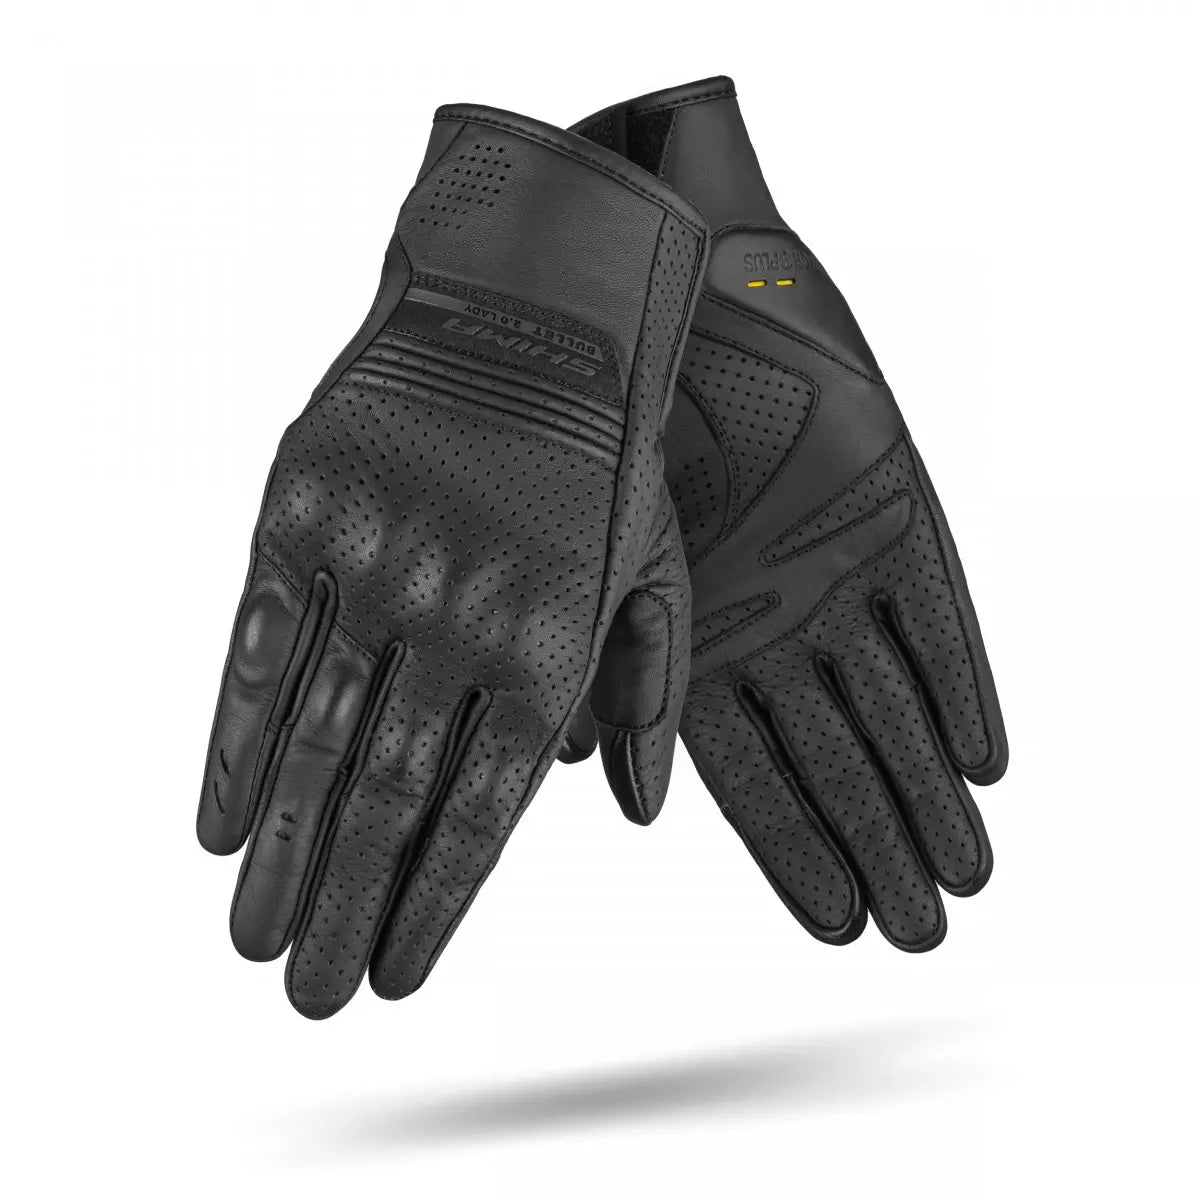 SHIMA black leather lady gloves with ventilation holes